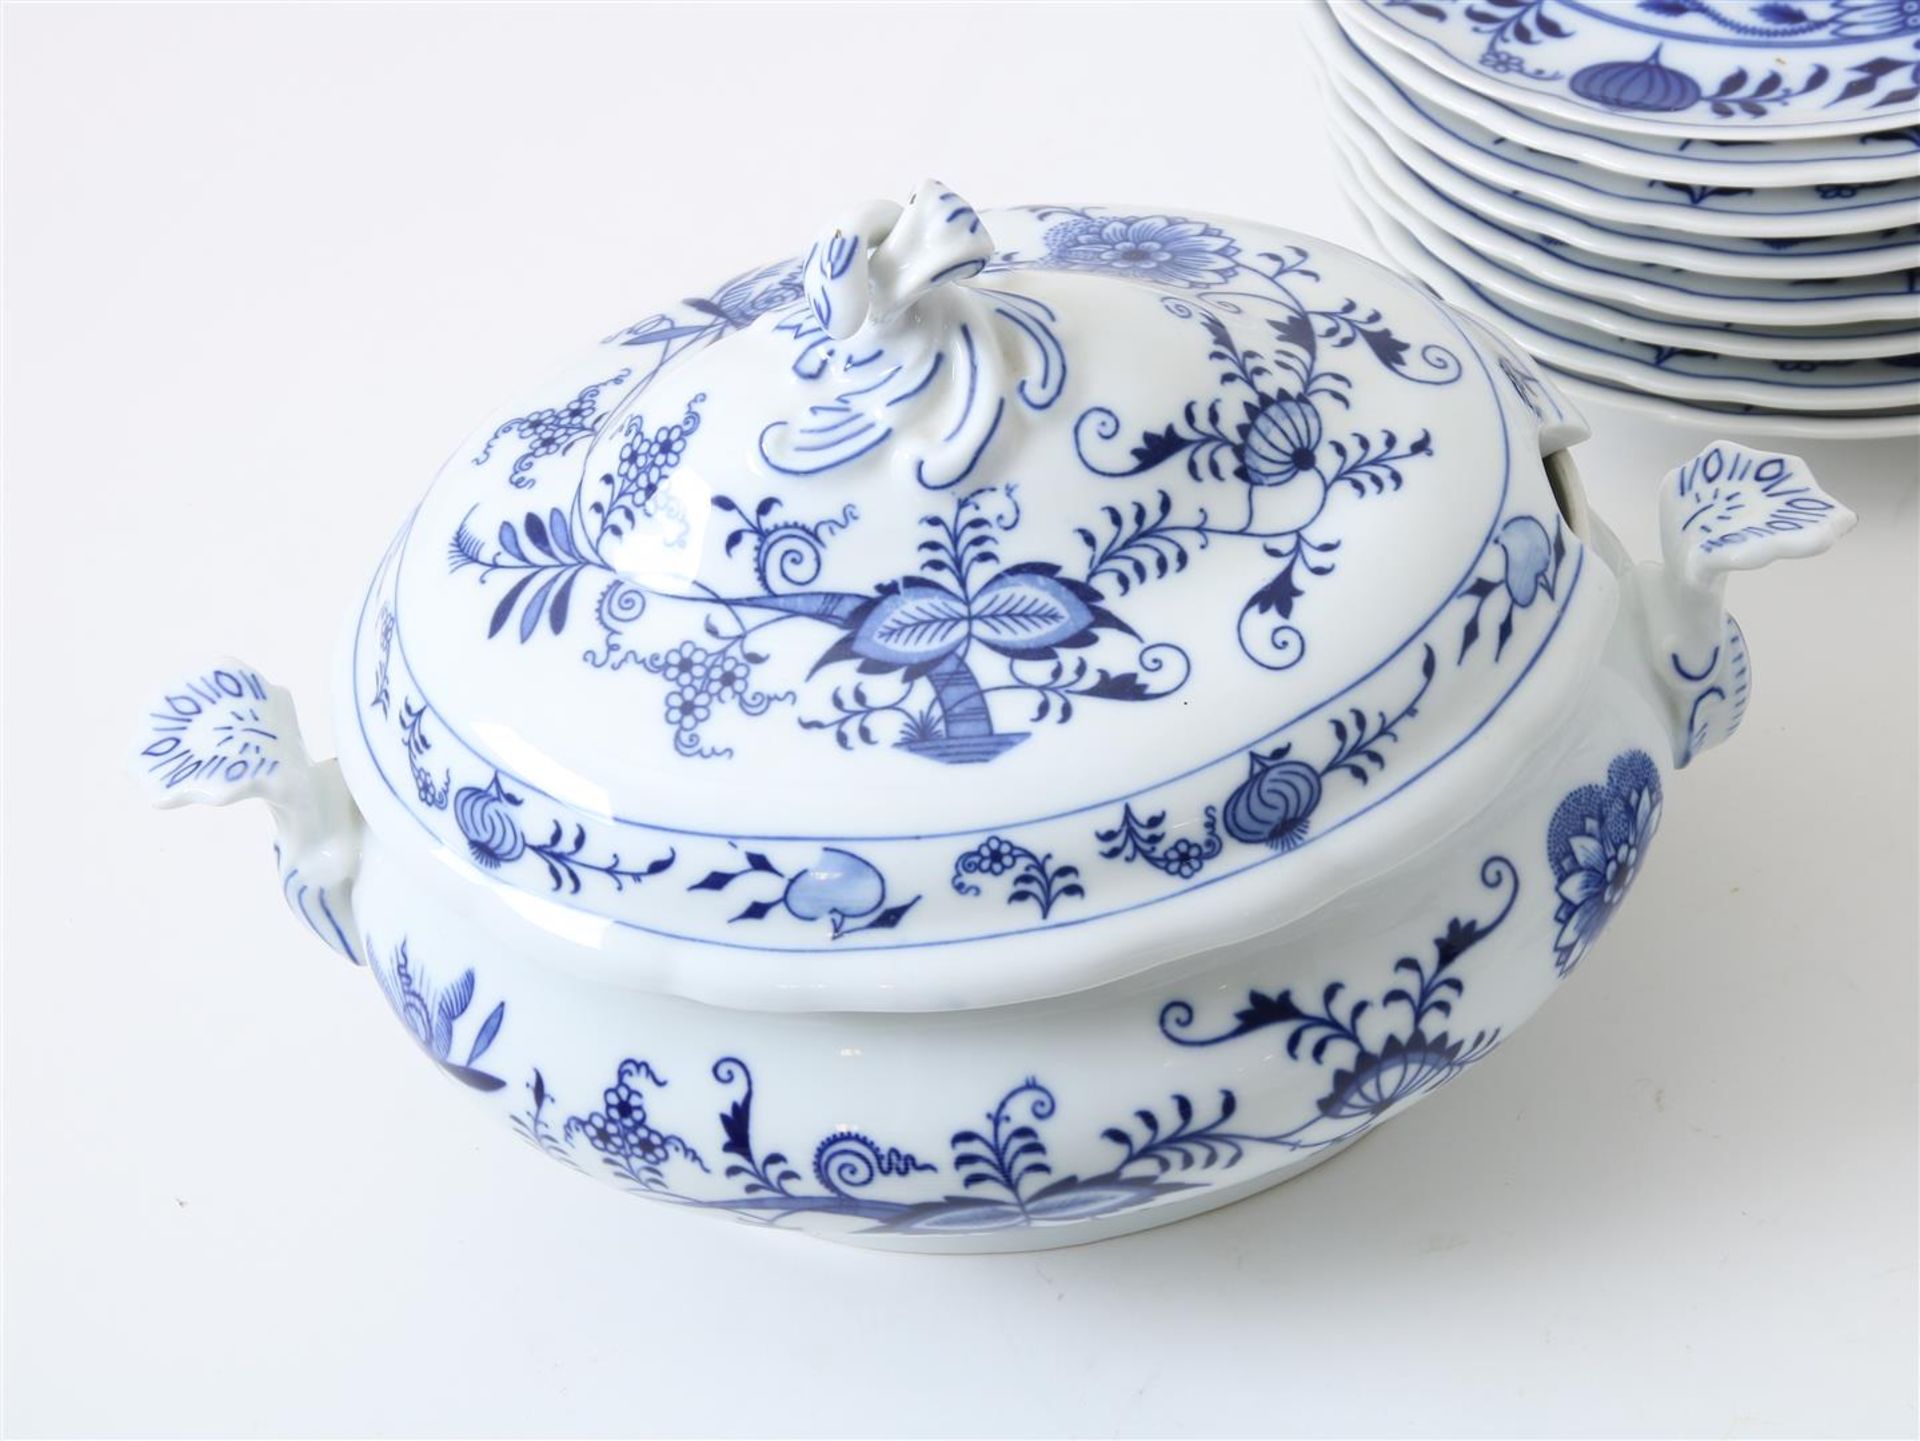 Approximately 50 pieces of porcelain tableware with zwiebelmuster decor, including bowls, - Image 3 of 9